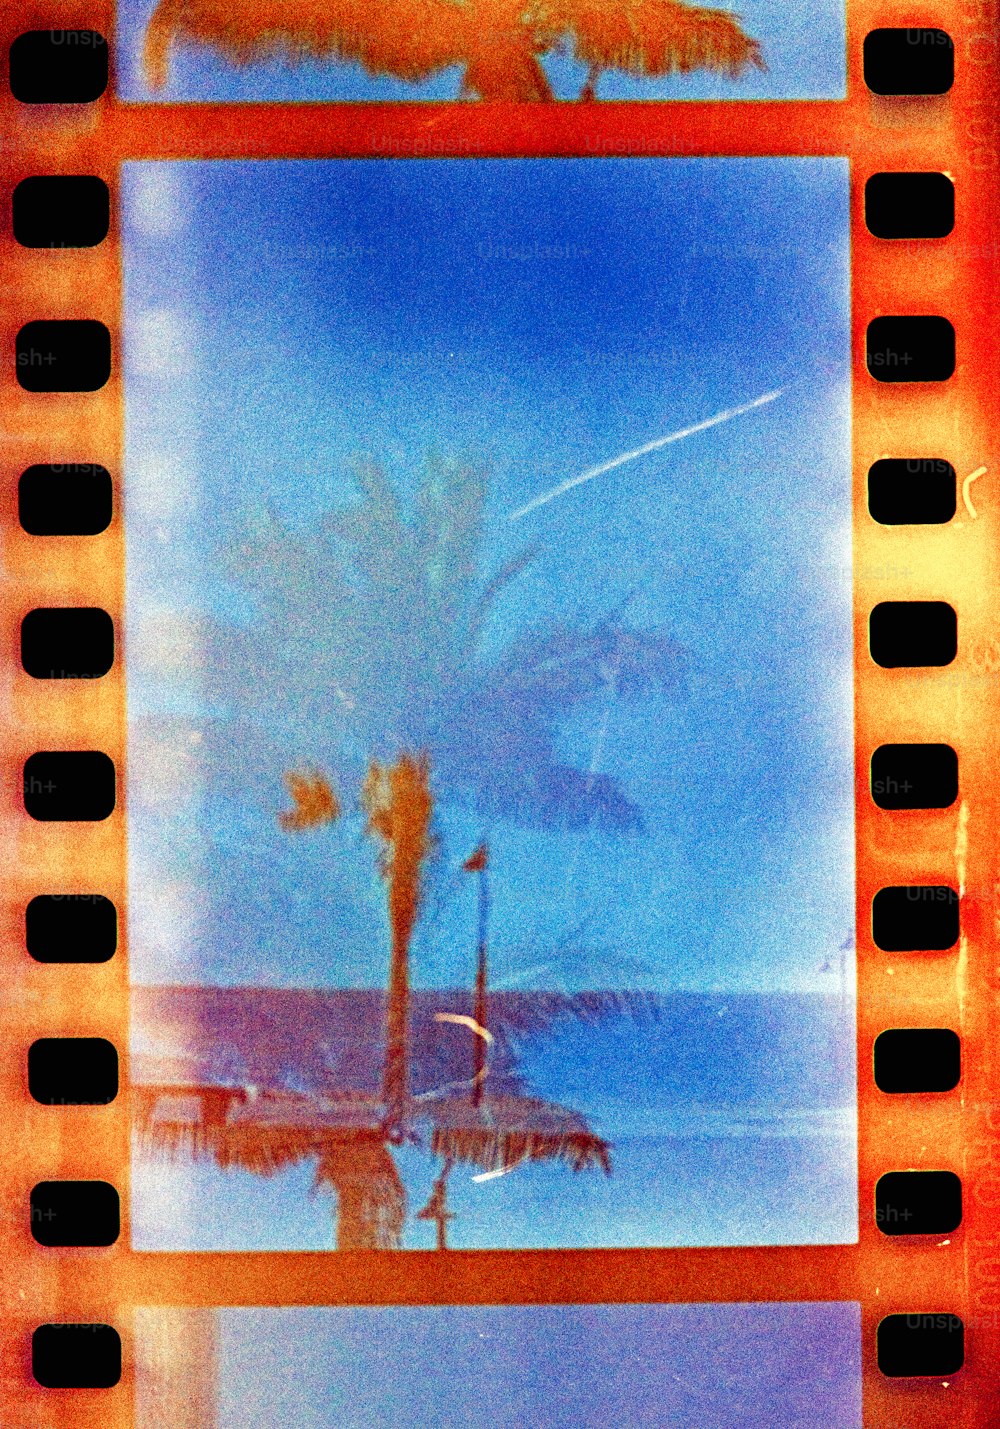 a film strip with a picture of a palm tree